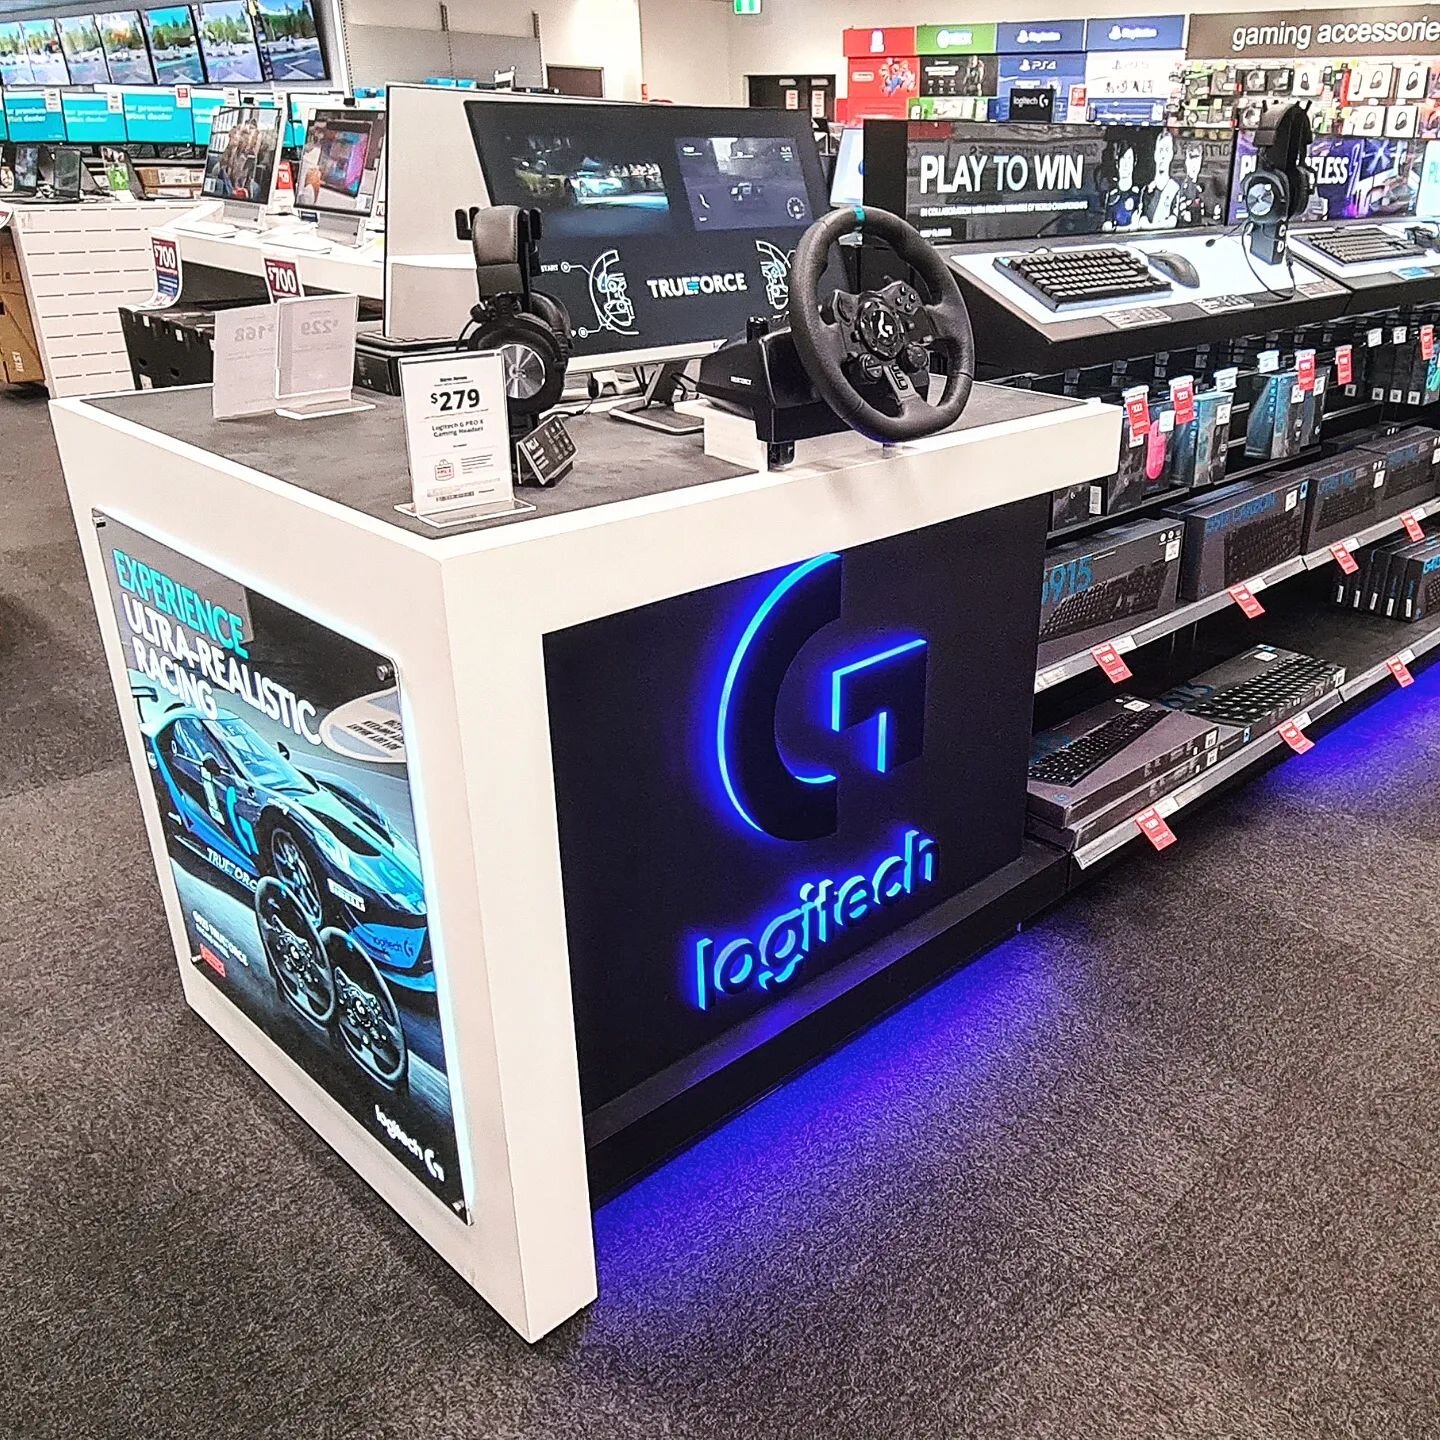 𝗚𝗔𝗠𝗘 𝗖𝗛𝗔𝗡𝗚𝗘𝗥! &bull; Big displays require constant maintenance. This can be anything from customer damage, a product update or an LED panel going dark. This display for @logitech has everything on it from a G923 wheel simulator, powered he